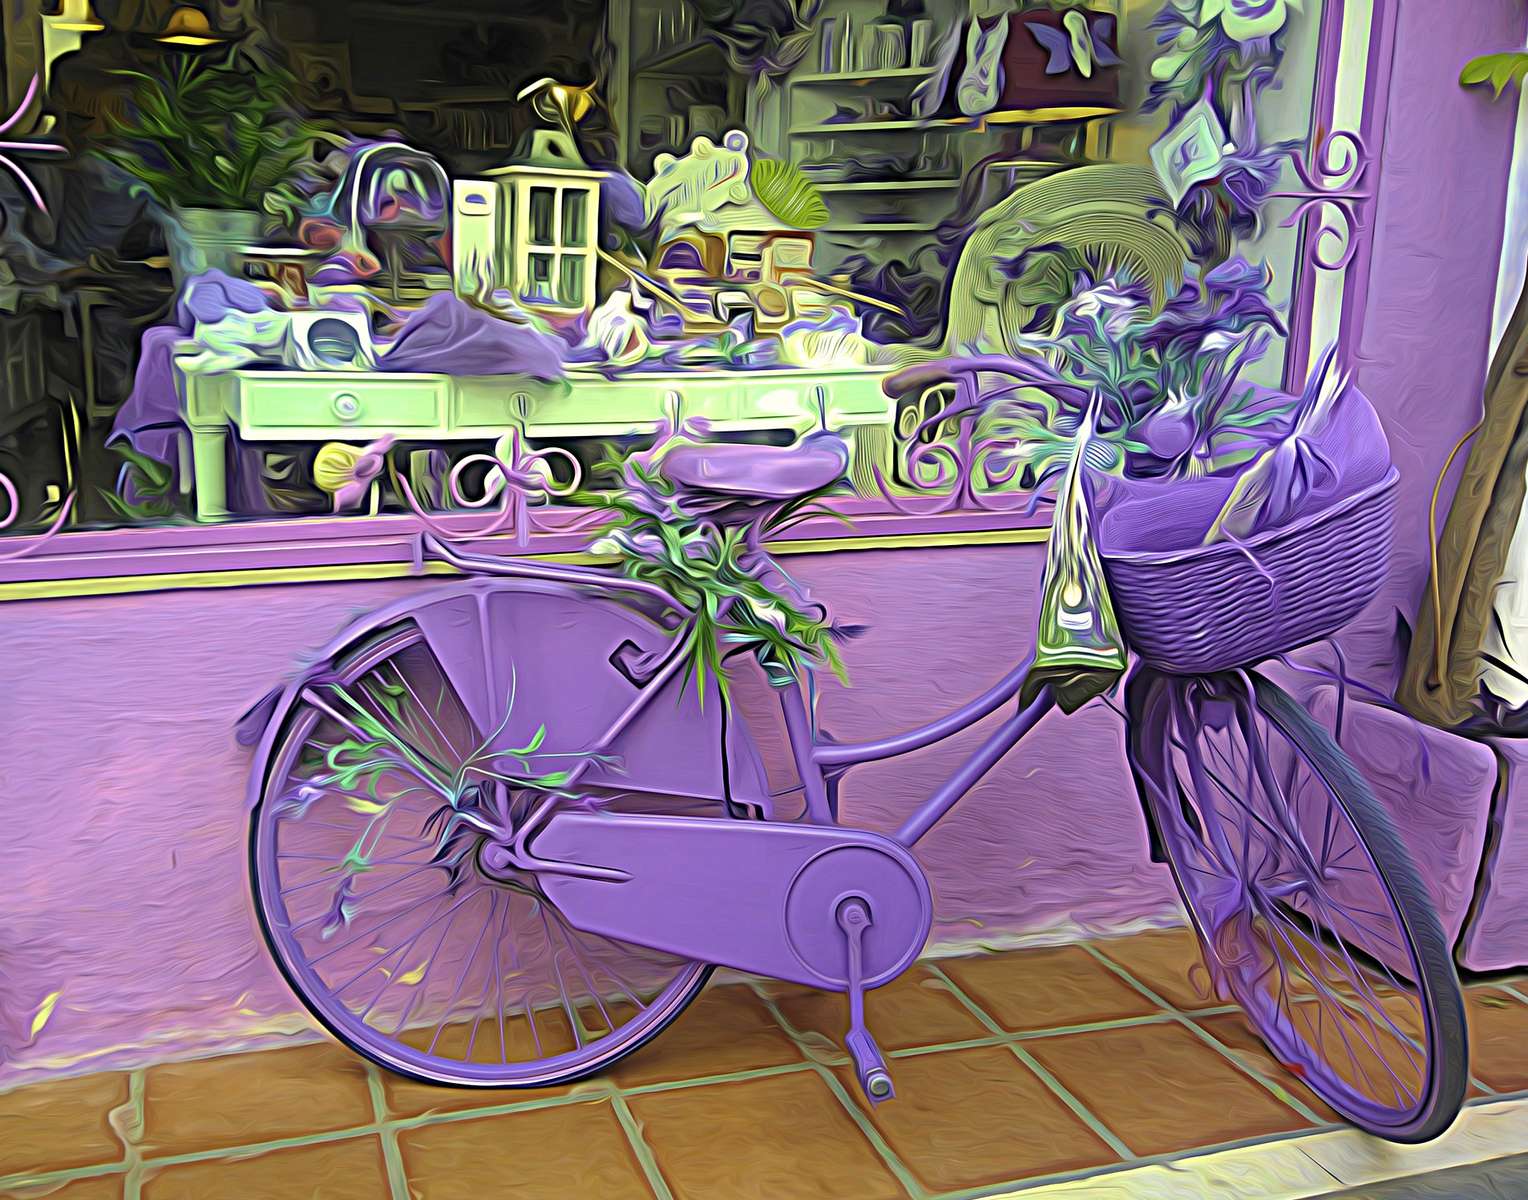 A lilac bicycle under the display case - an artistic composition online puzzle